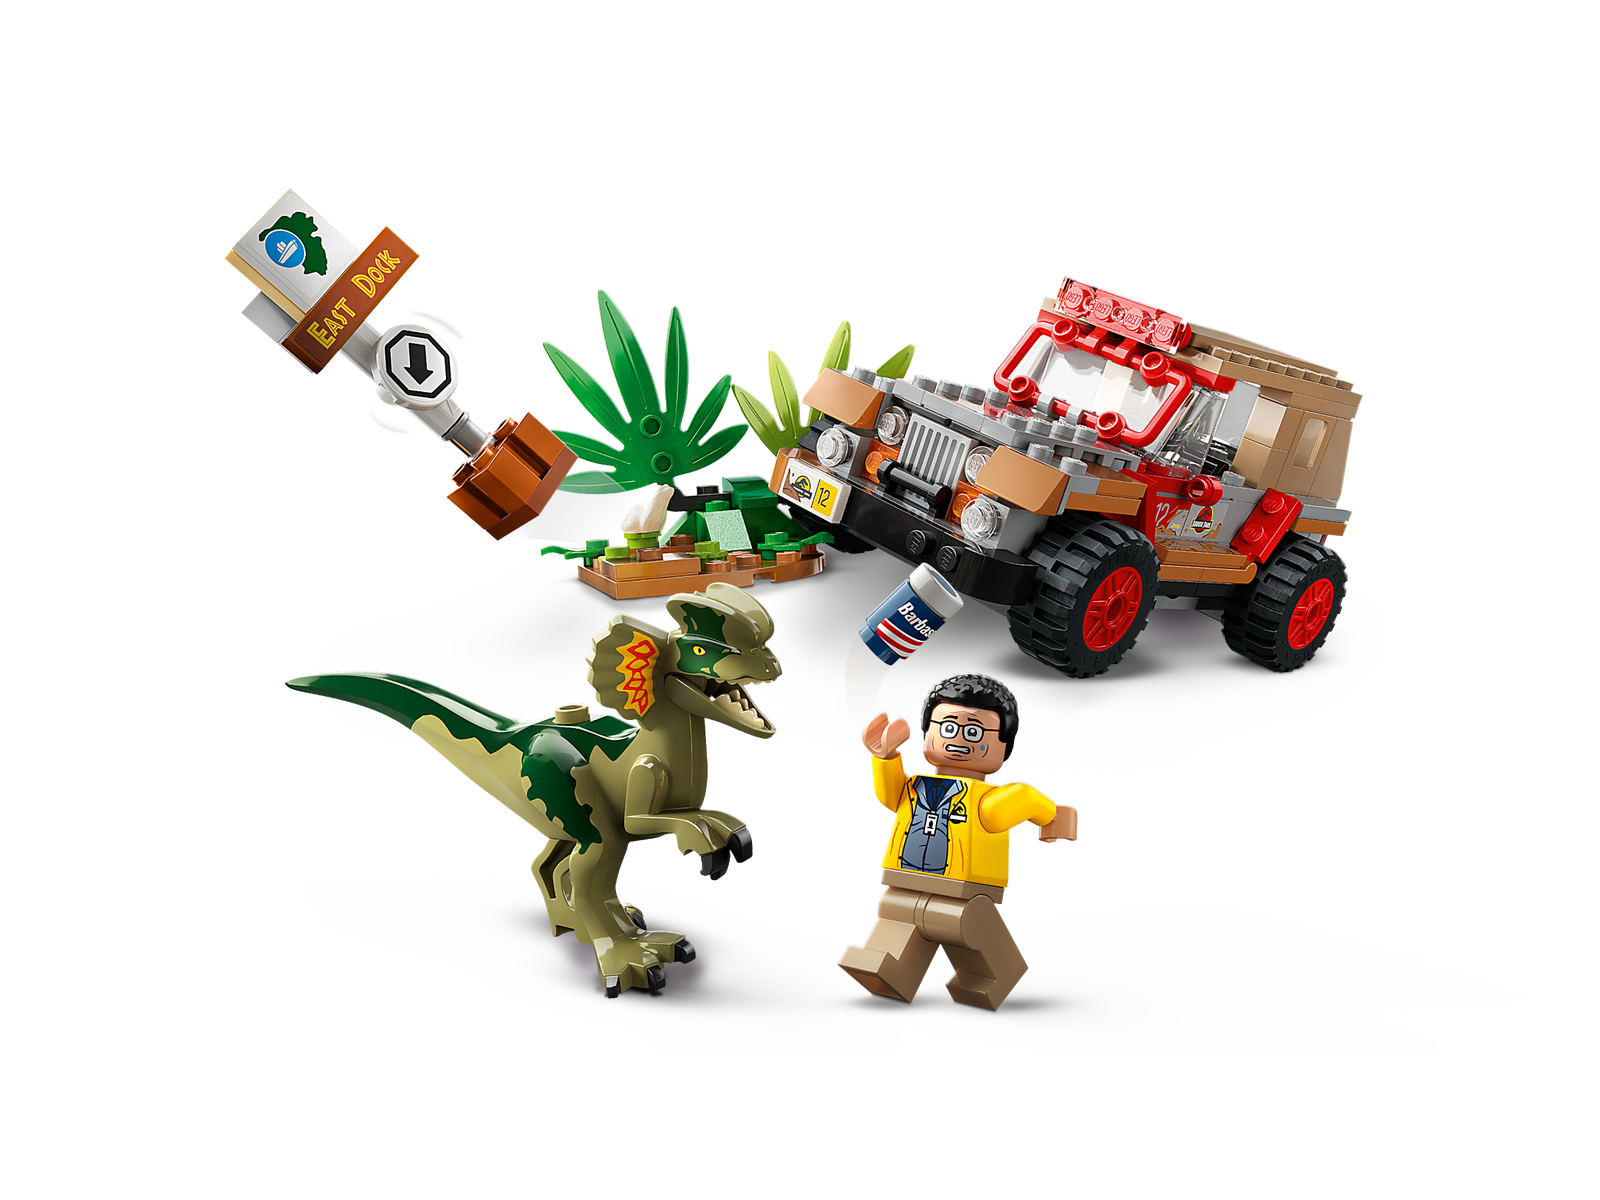 Five New Lego Jurassic Park Sets Are Coming For The 30th Anniversary Nerdcube